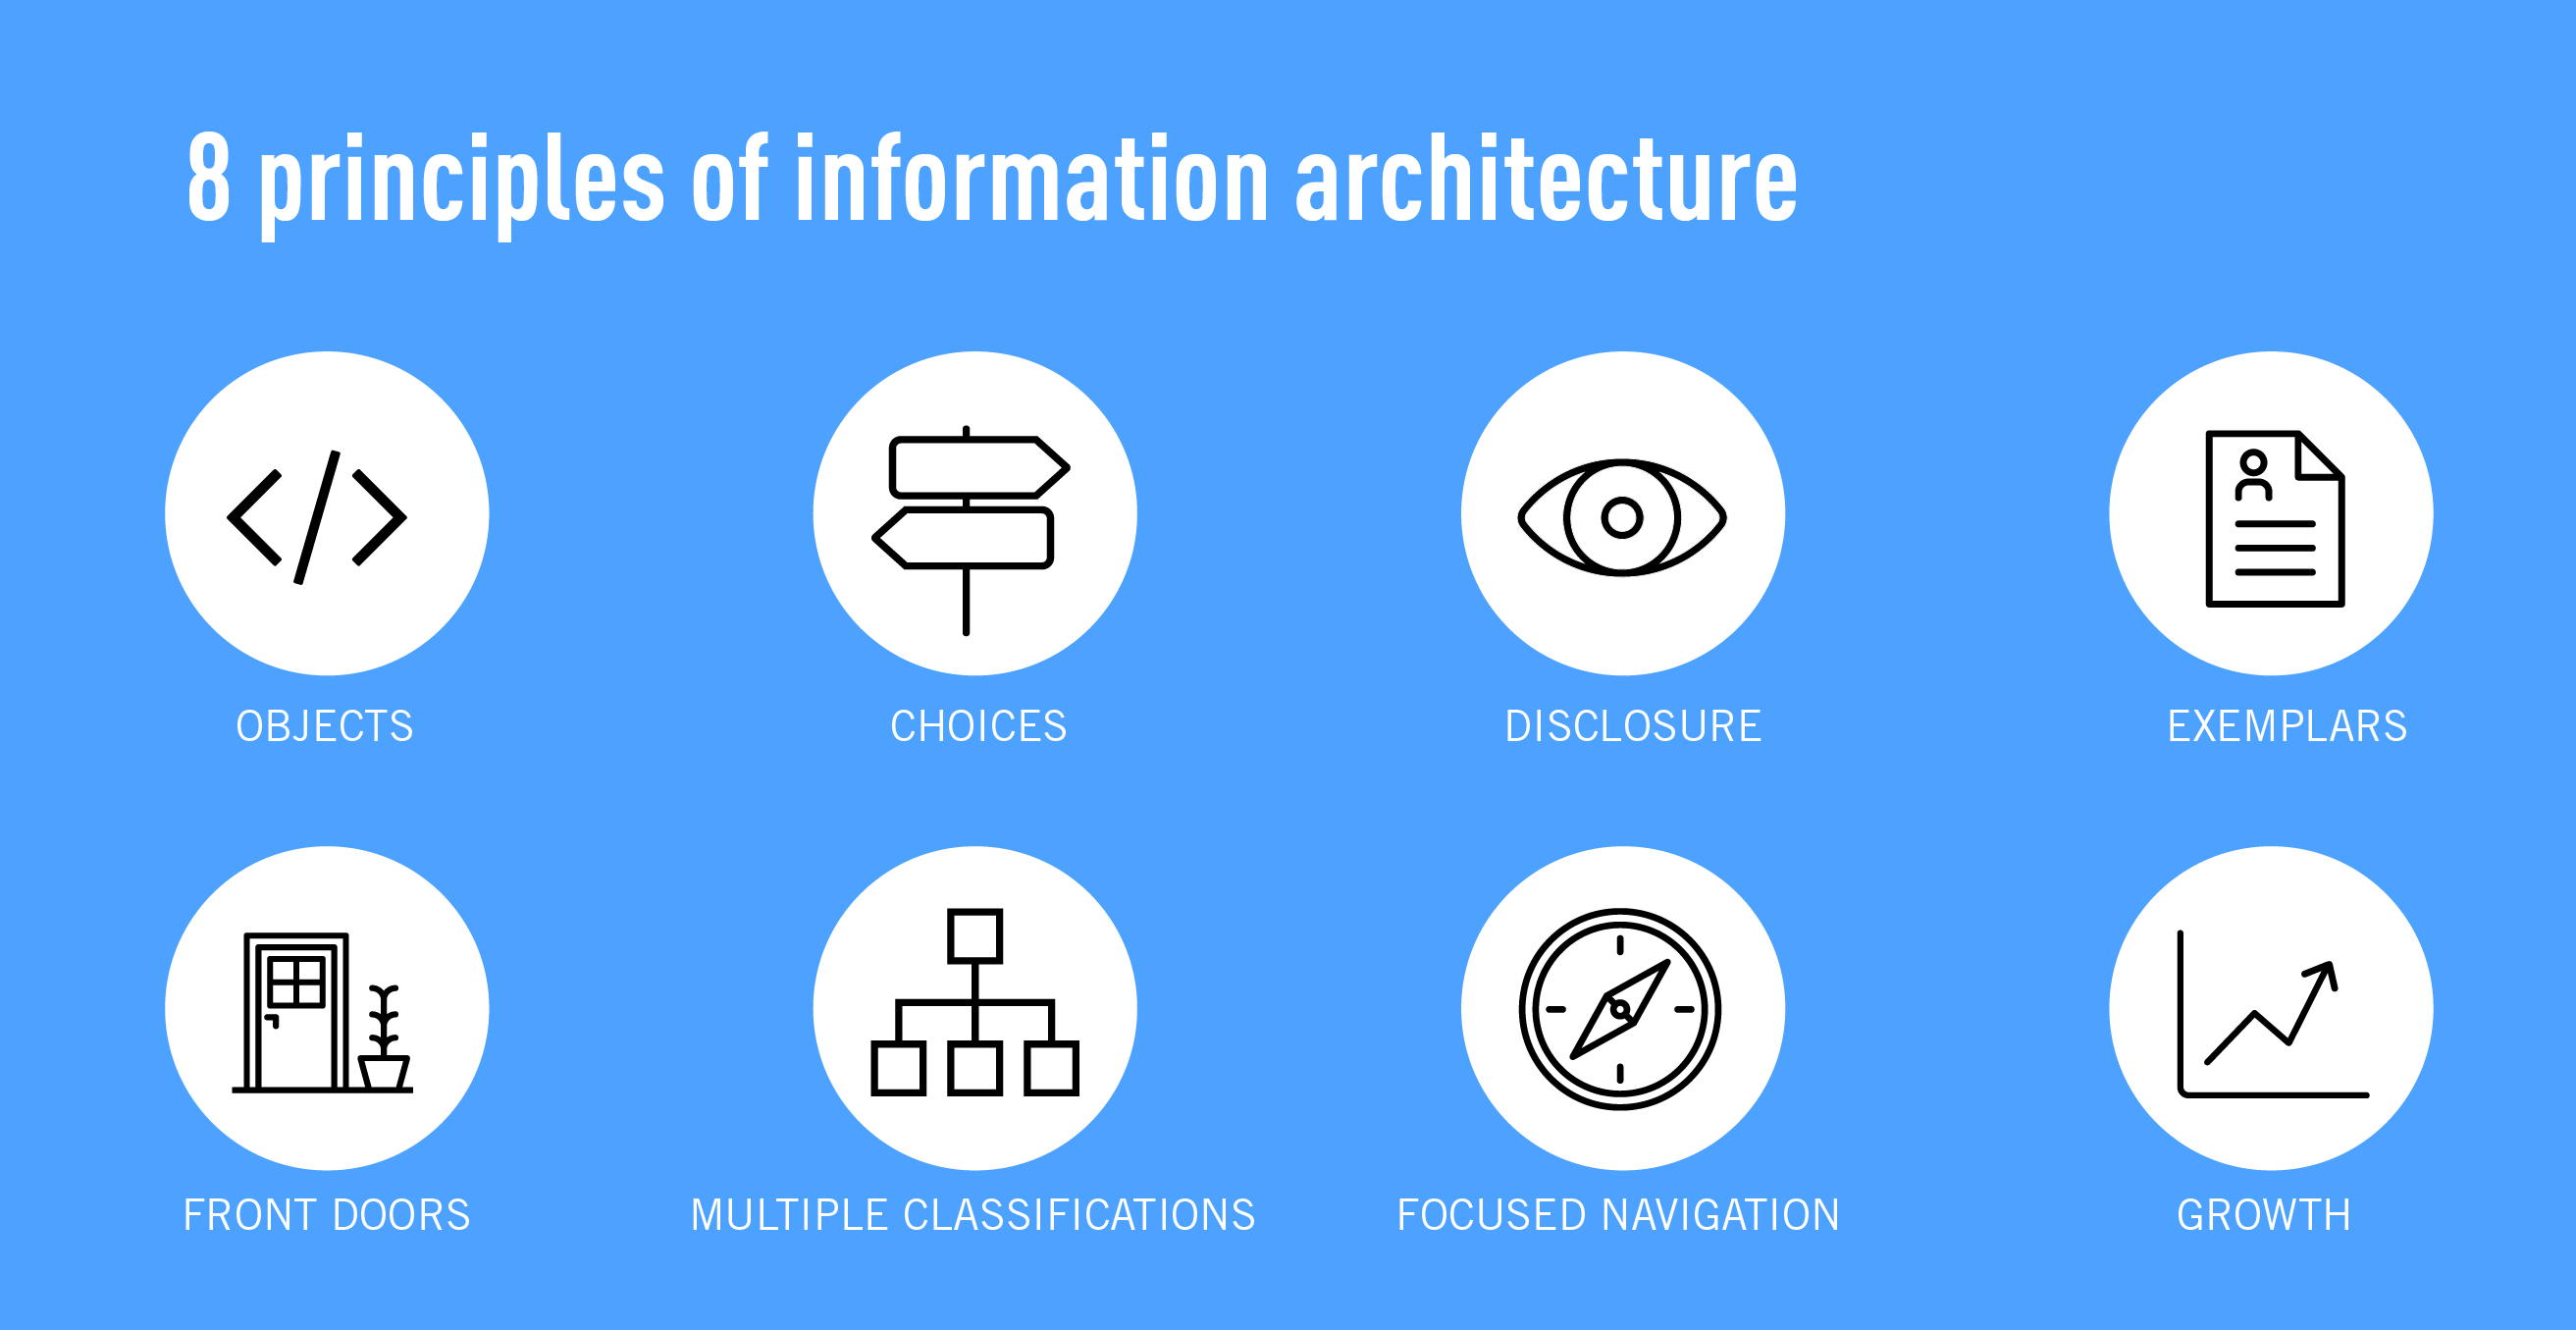 The 8 principles of information architecture in UX design